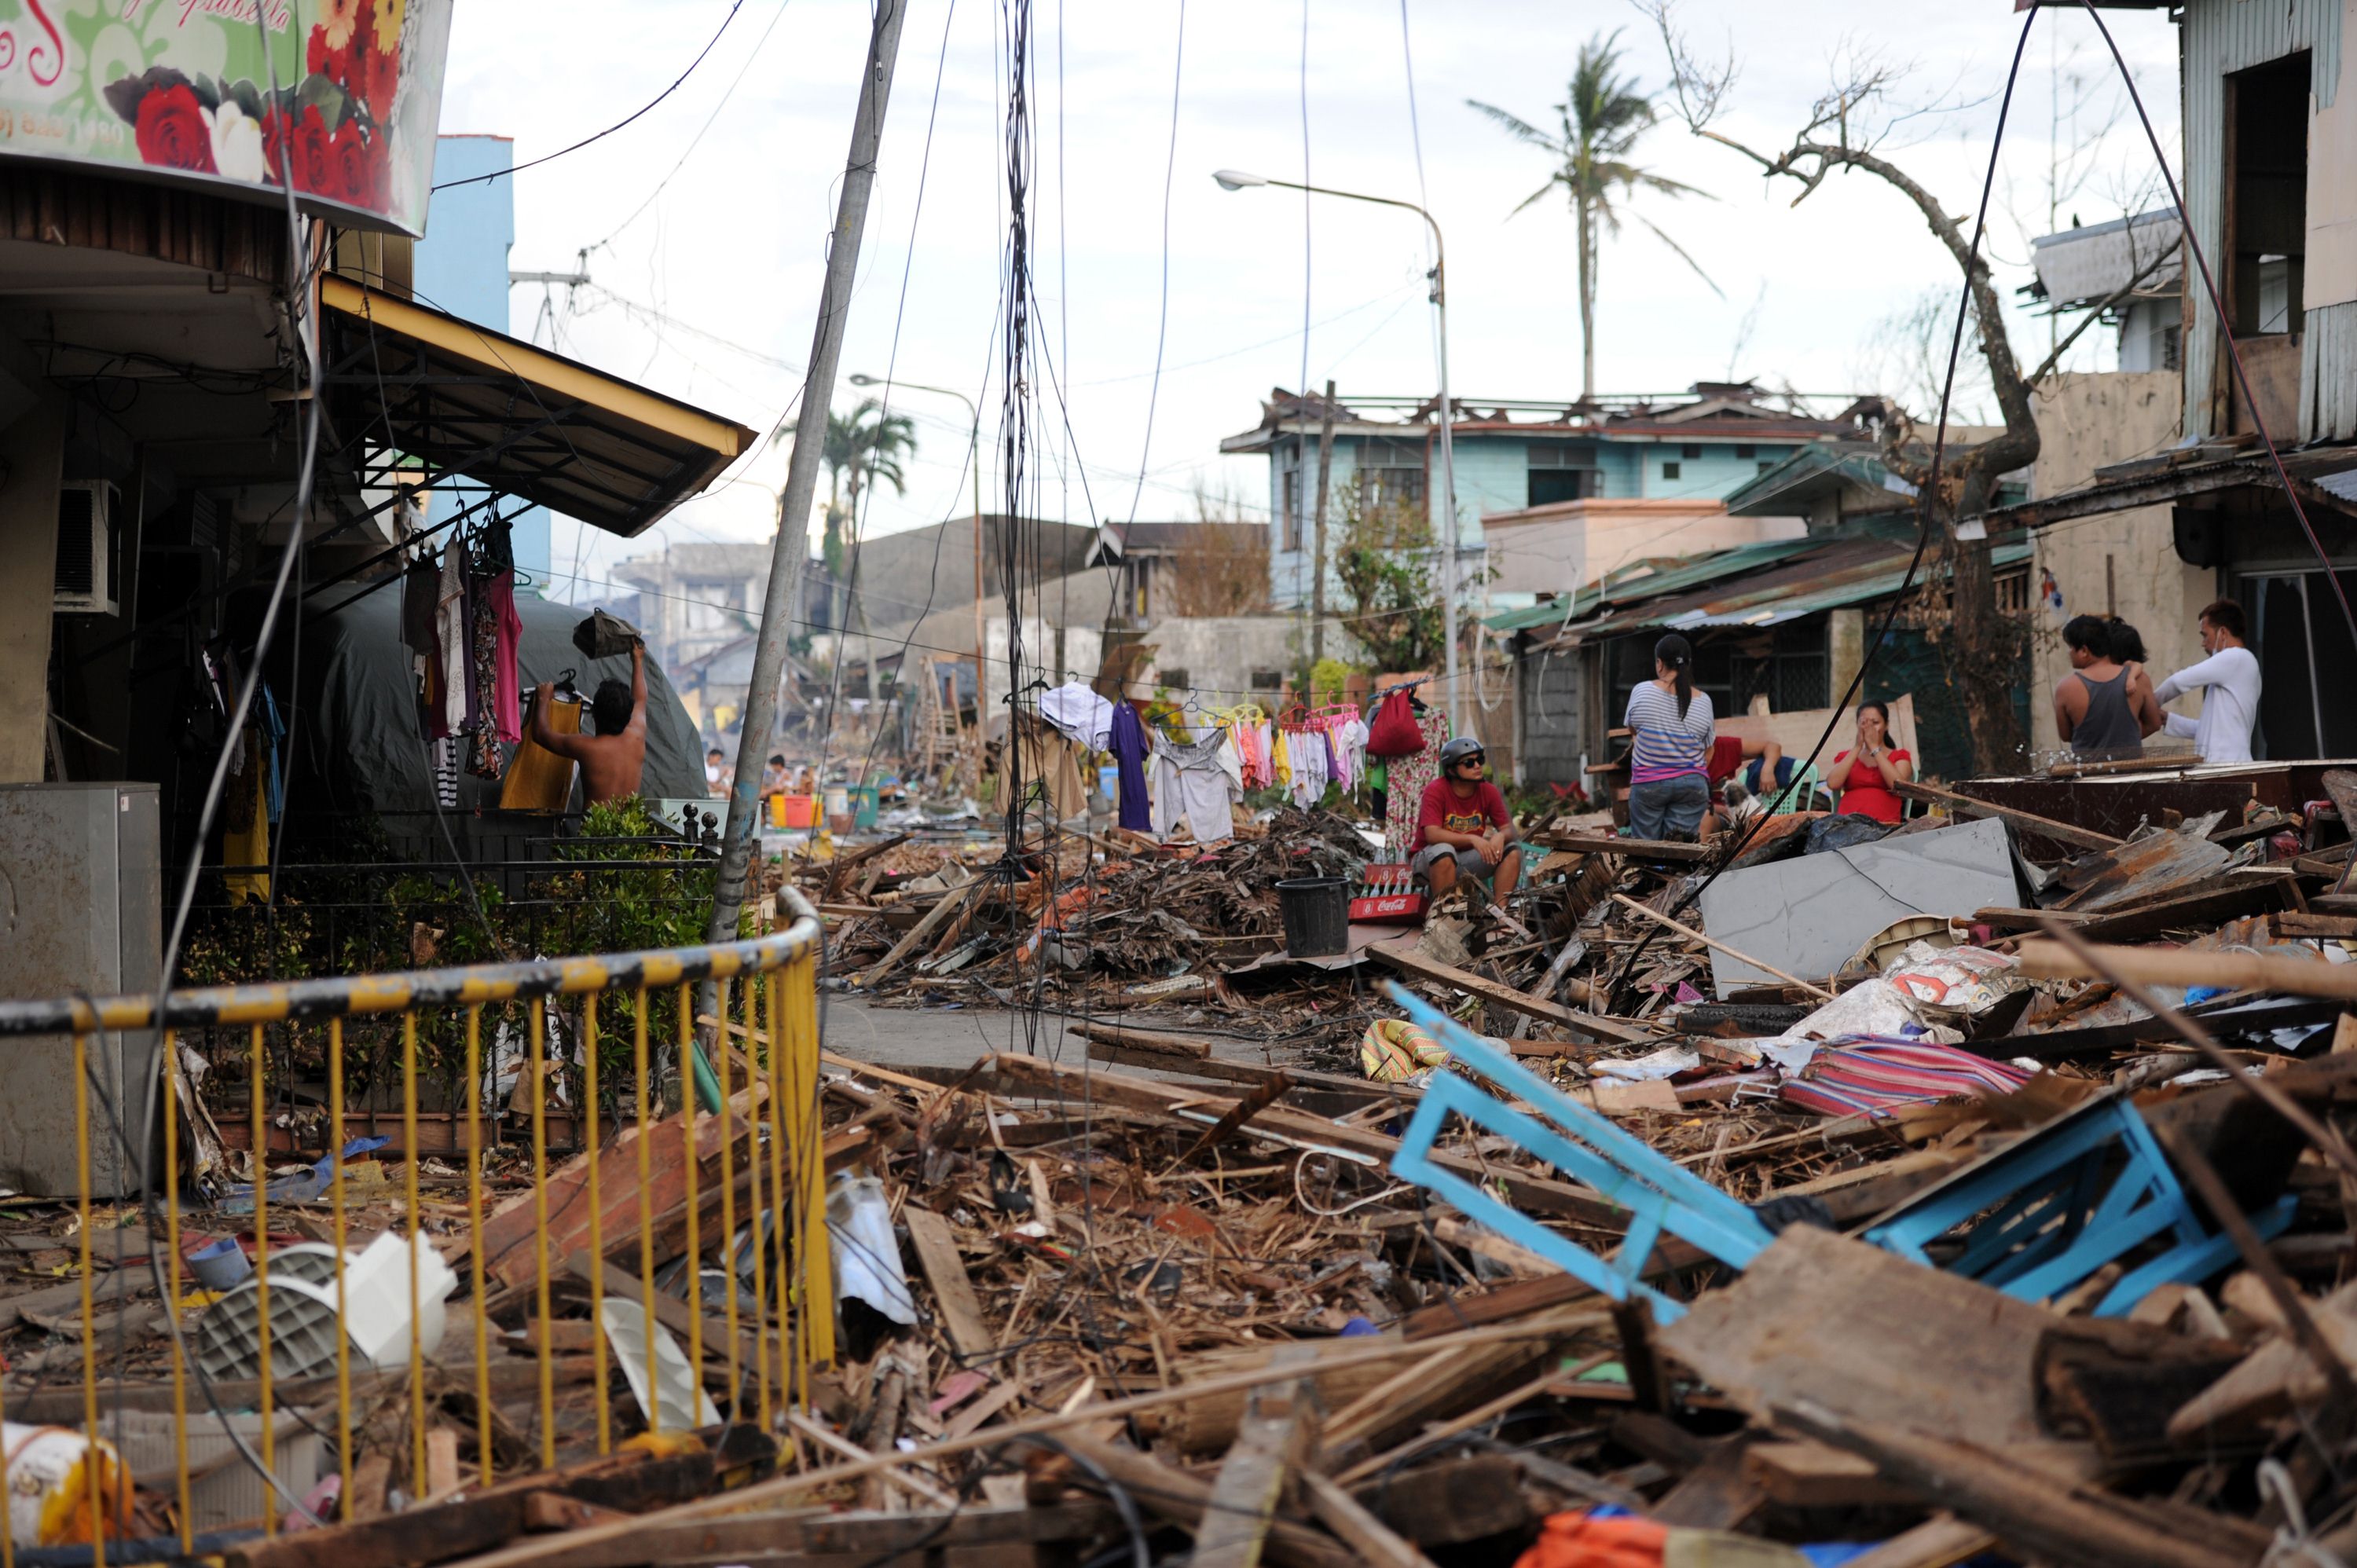 Piles of debris line the streets in Tacloban. Photo: AFP